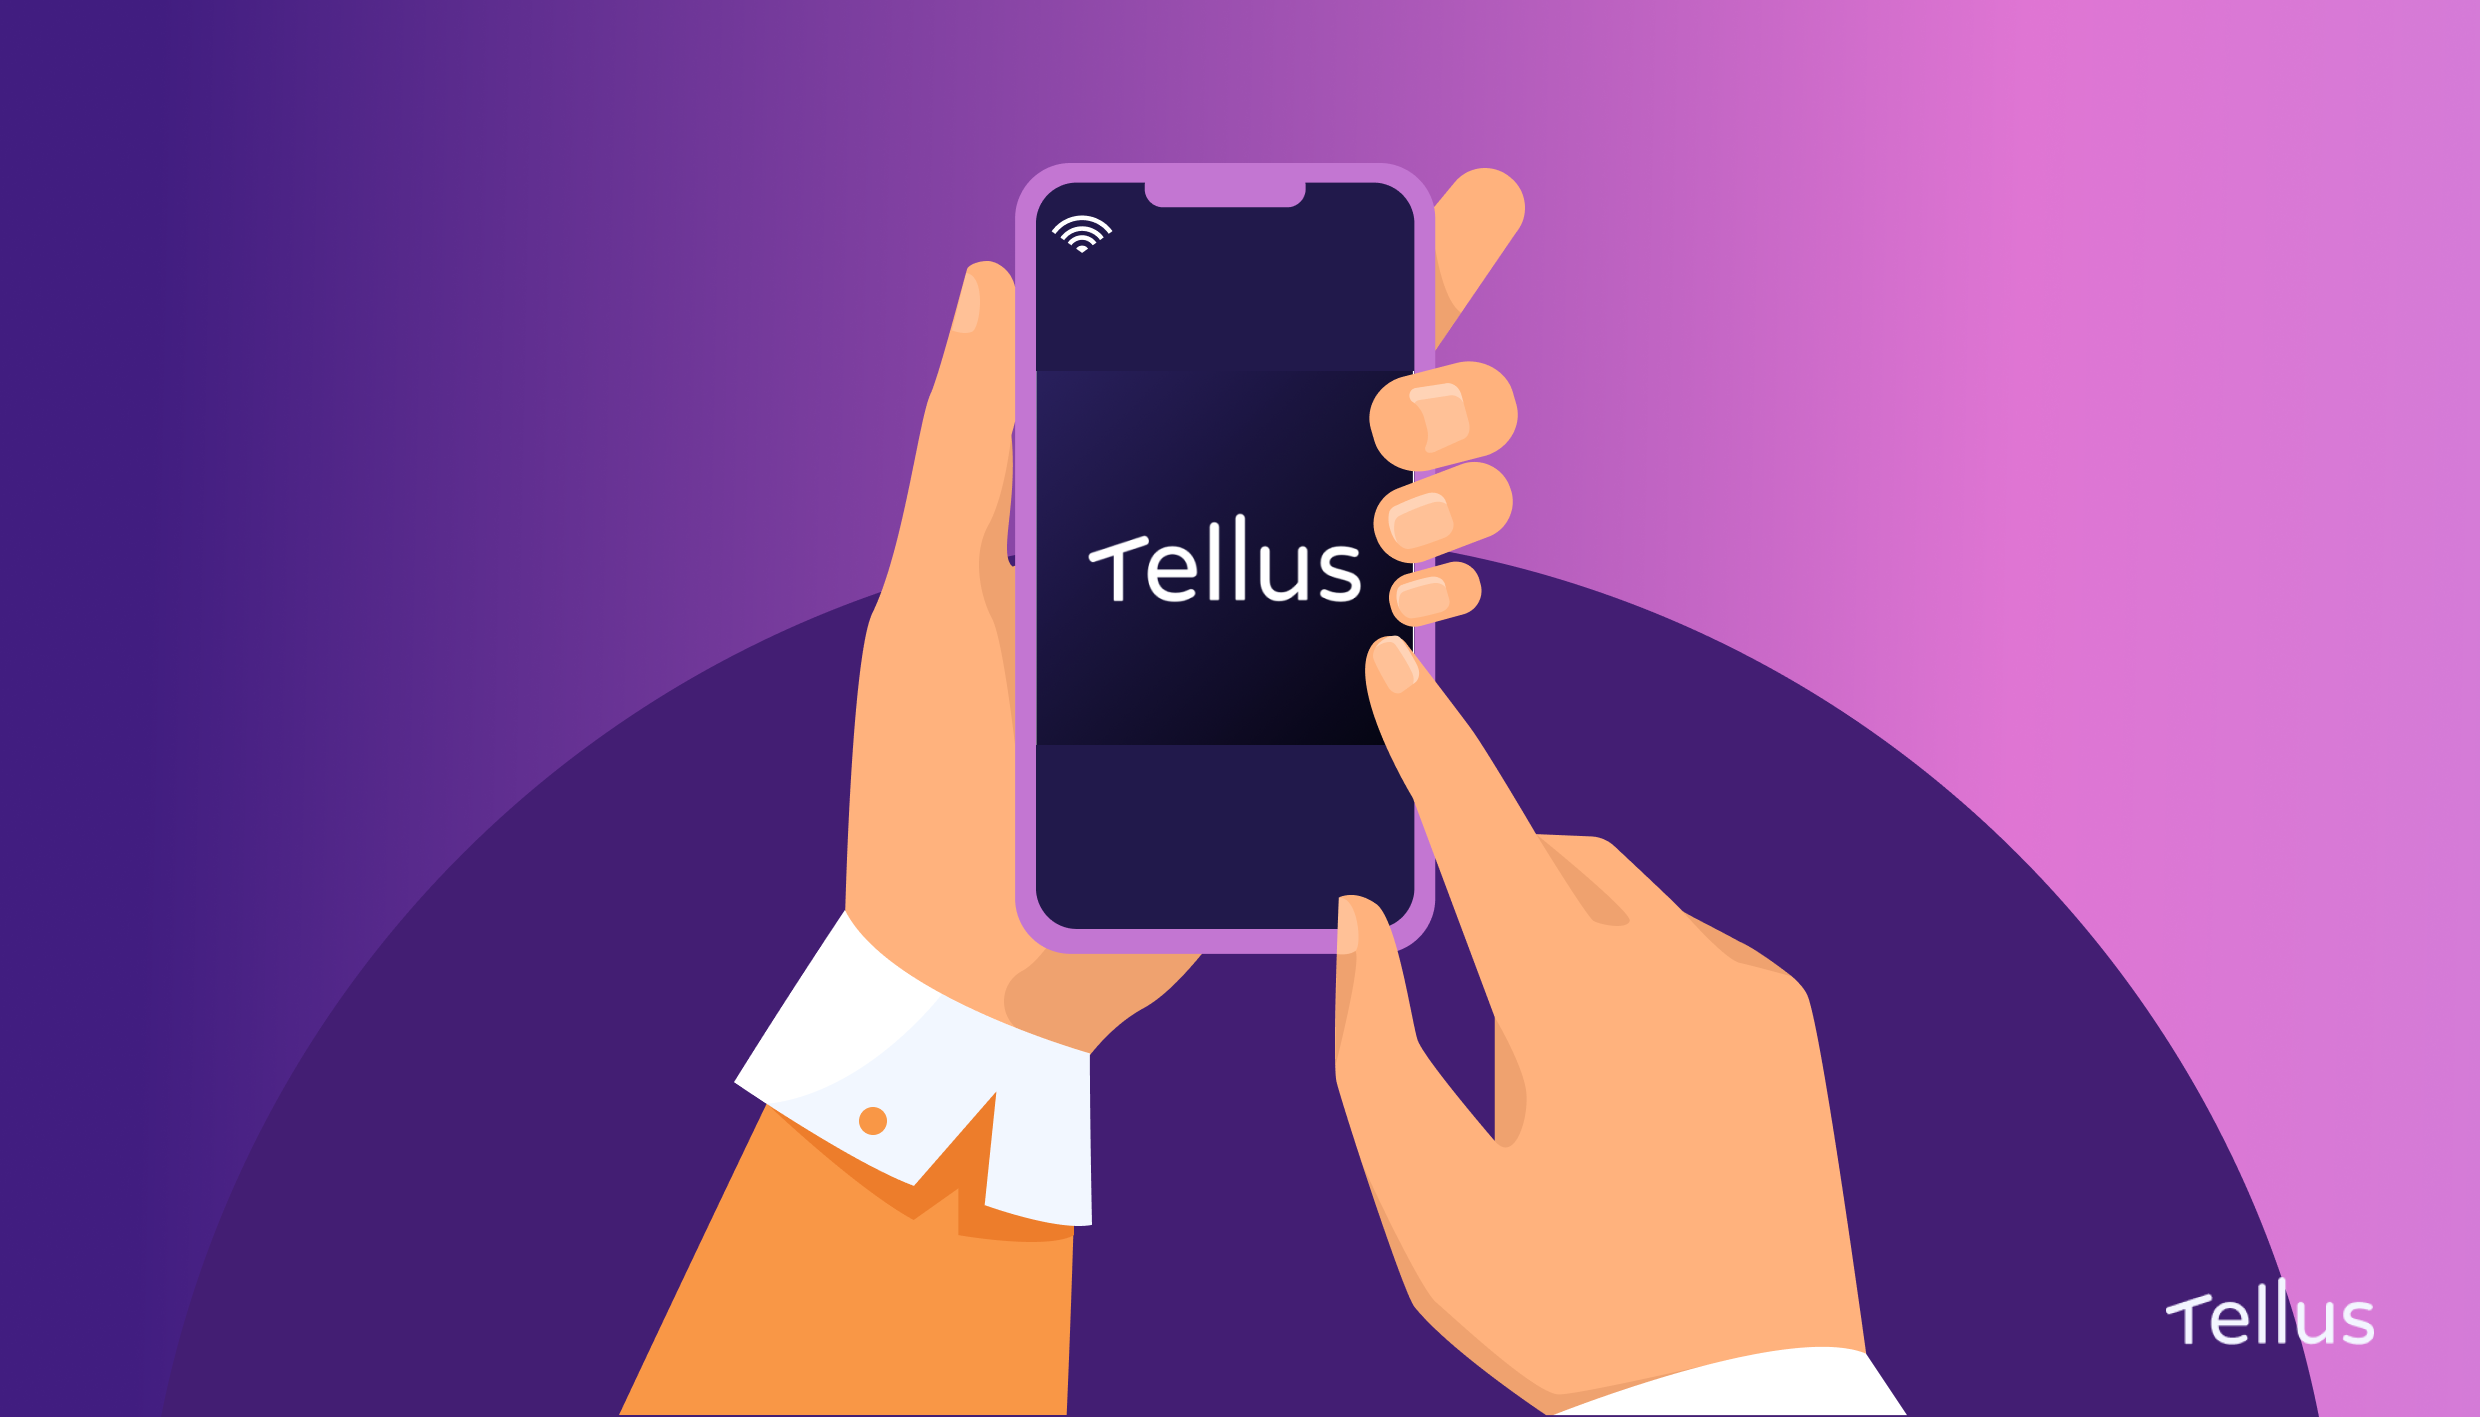 Illustration of mobile phone with Tellus logo on screen